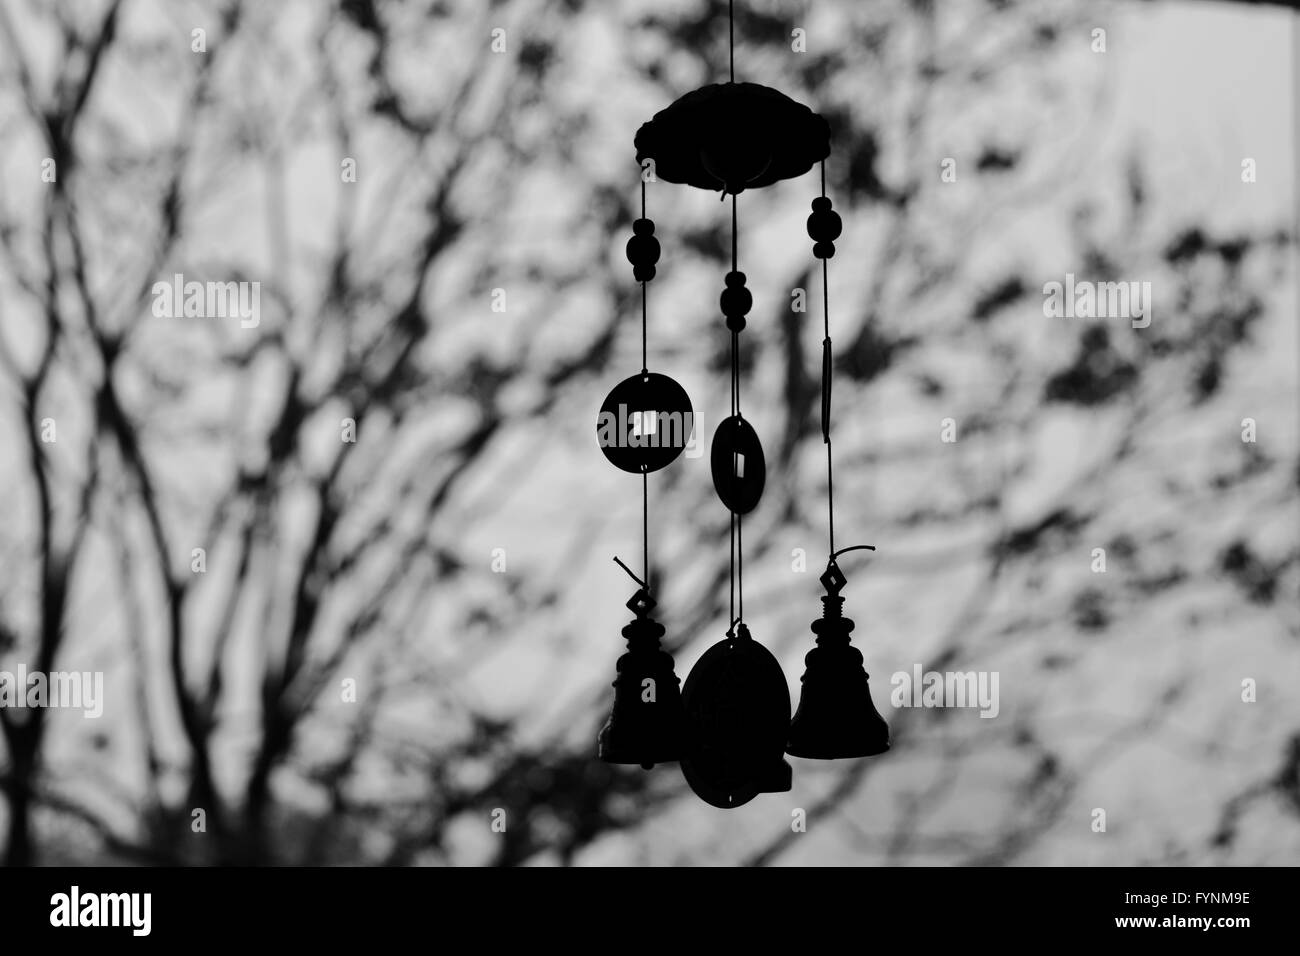 Windchime in classic black and white with a tree in the background Stock Photo